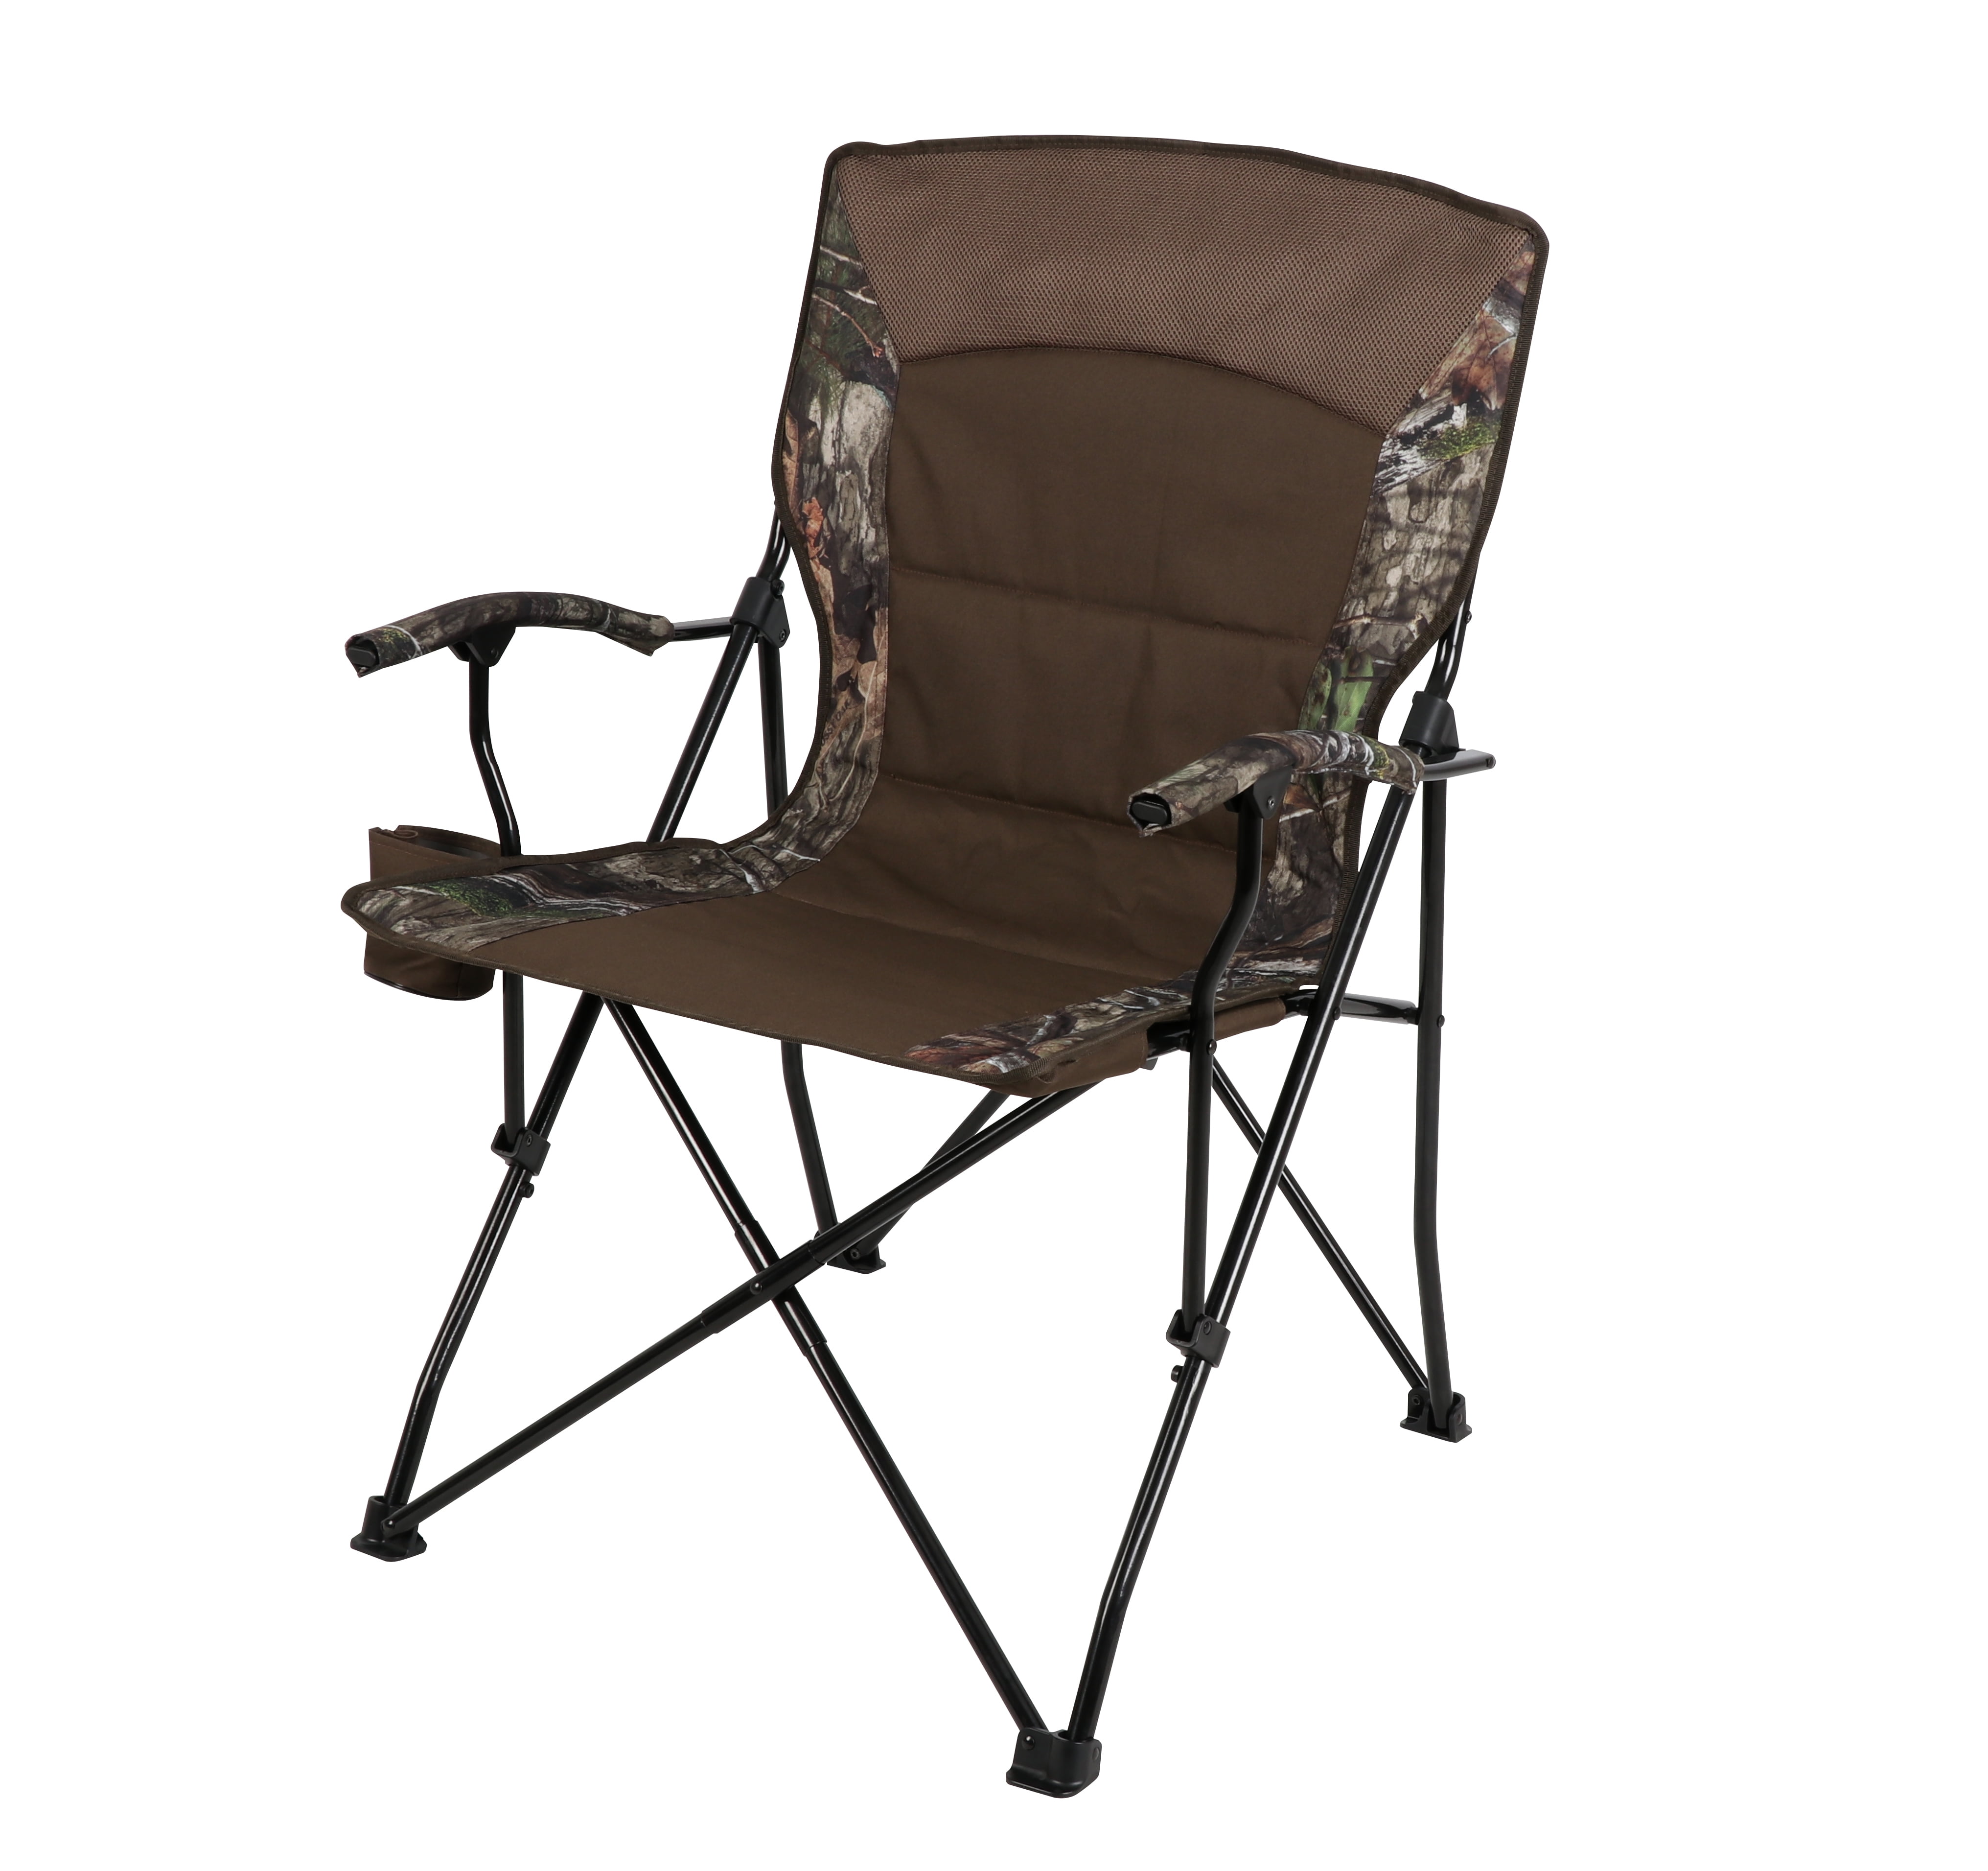 Mossy Oak Camping Chair, Brown